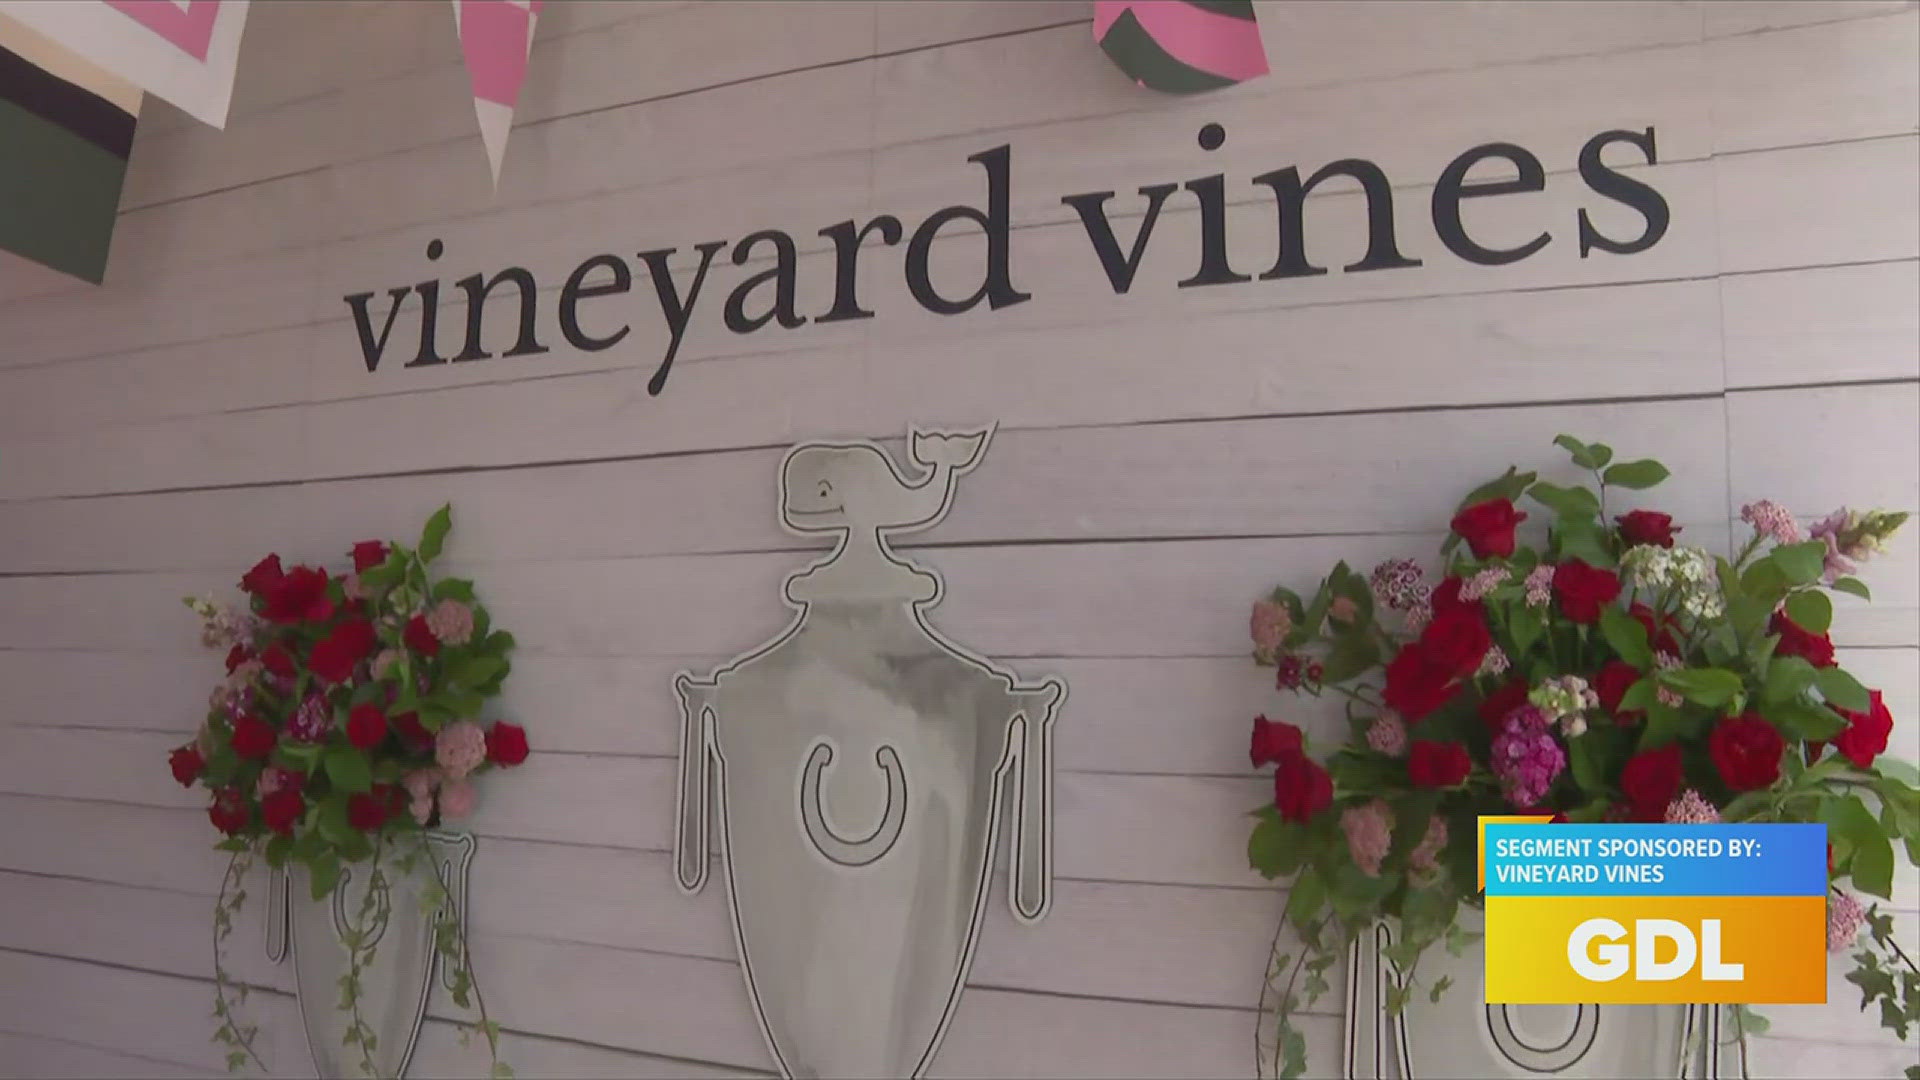 Vineyard Vines shows us their booth at Churchill Downs.